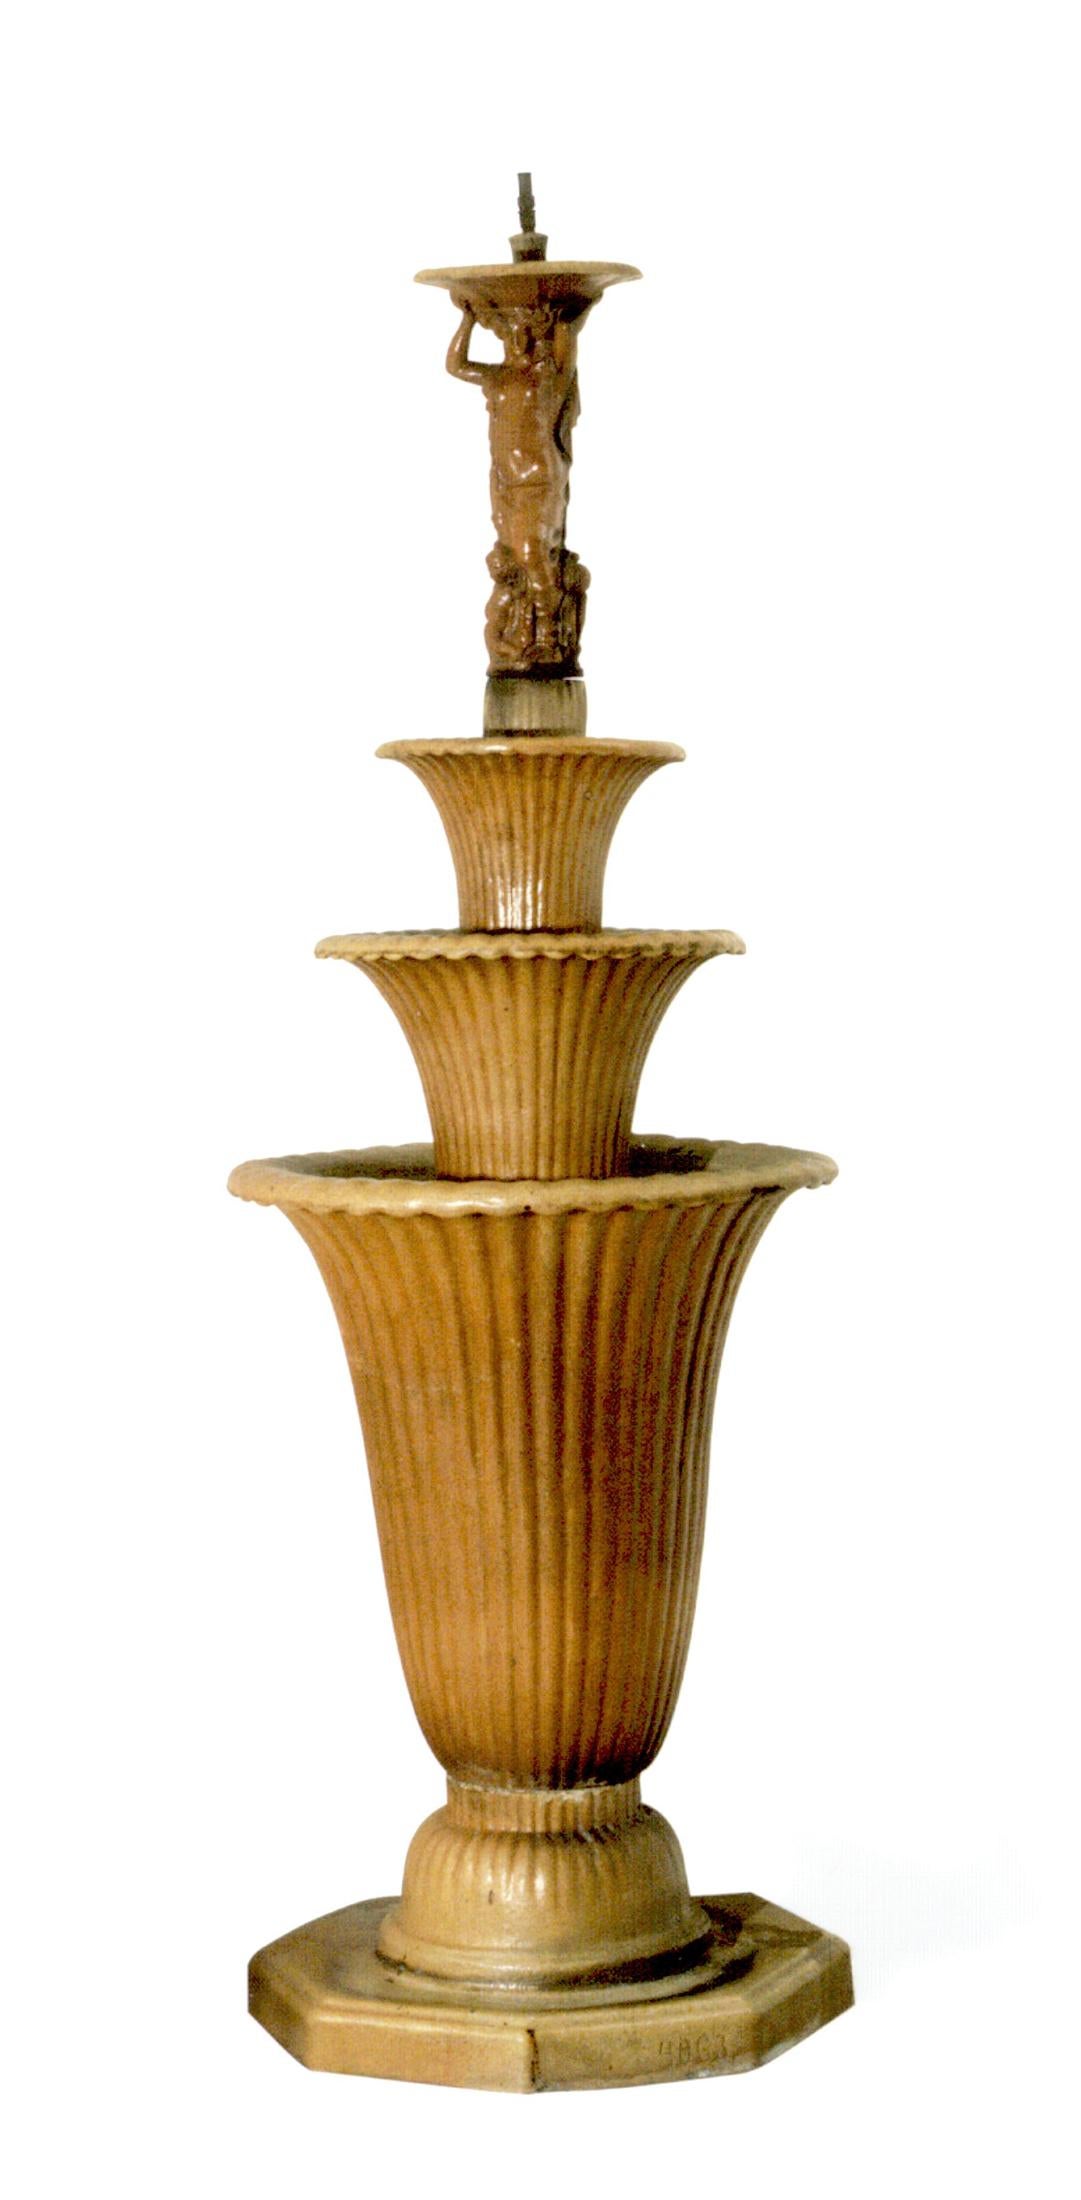 Hand-Crafted Original and Unique Ceramic Fountain by Otto Prutscher and Michael Powolny, 1914 For Sale